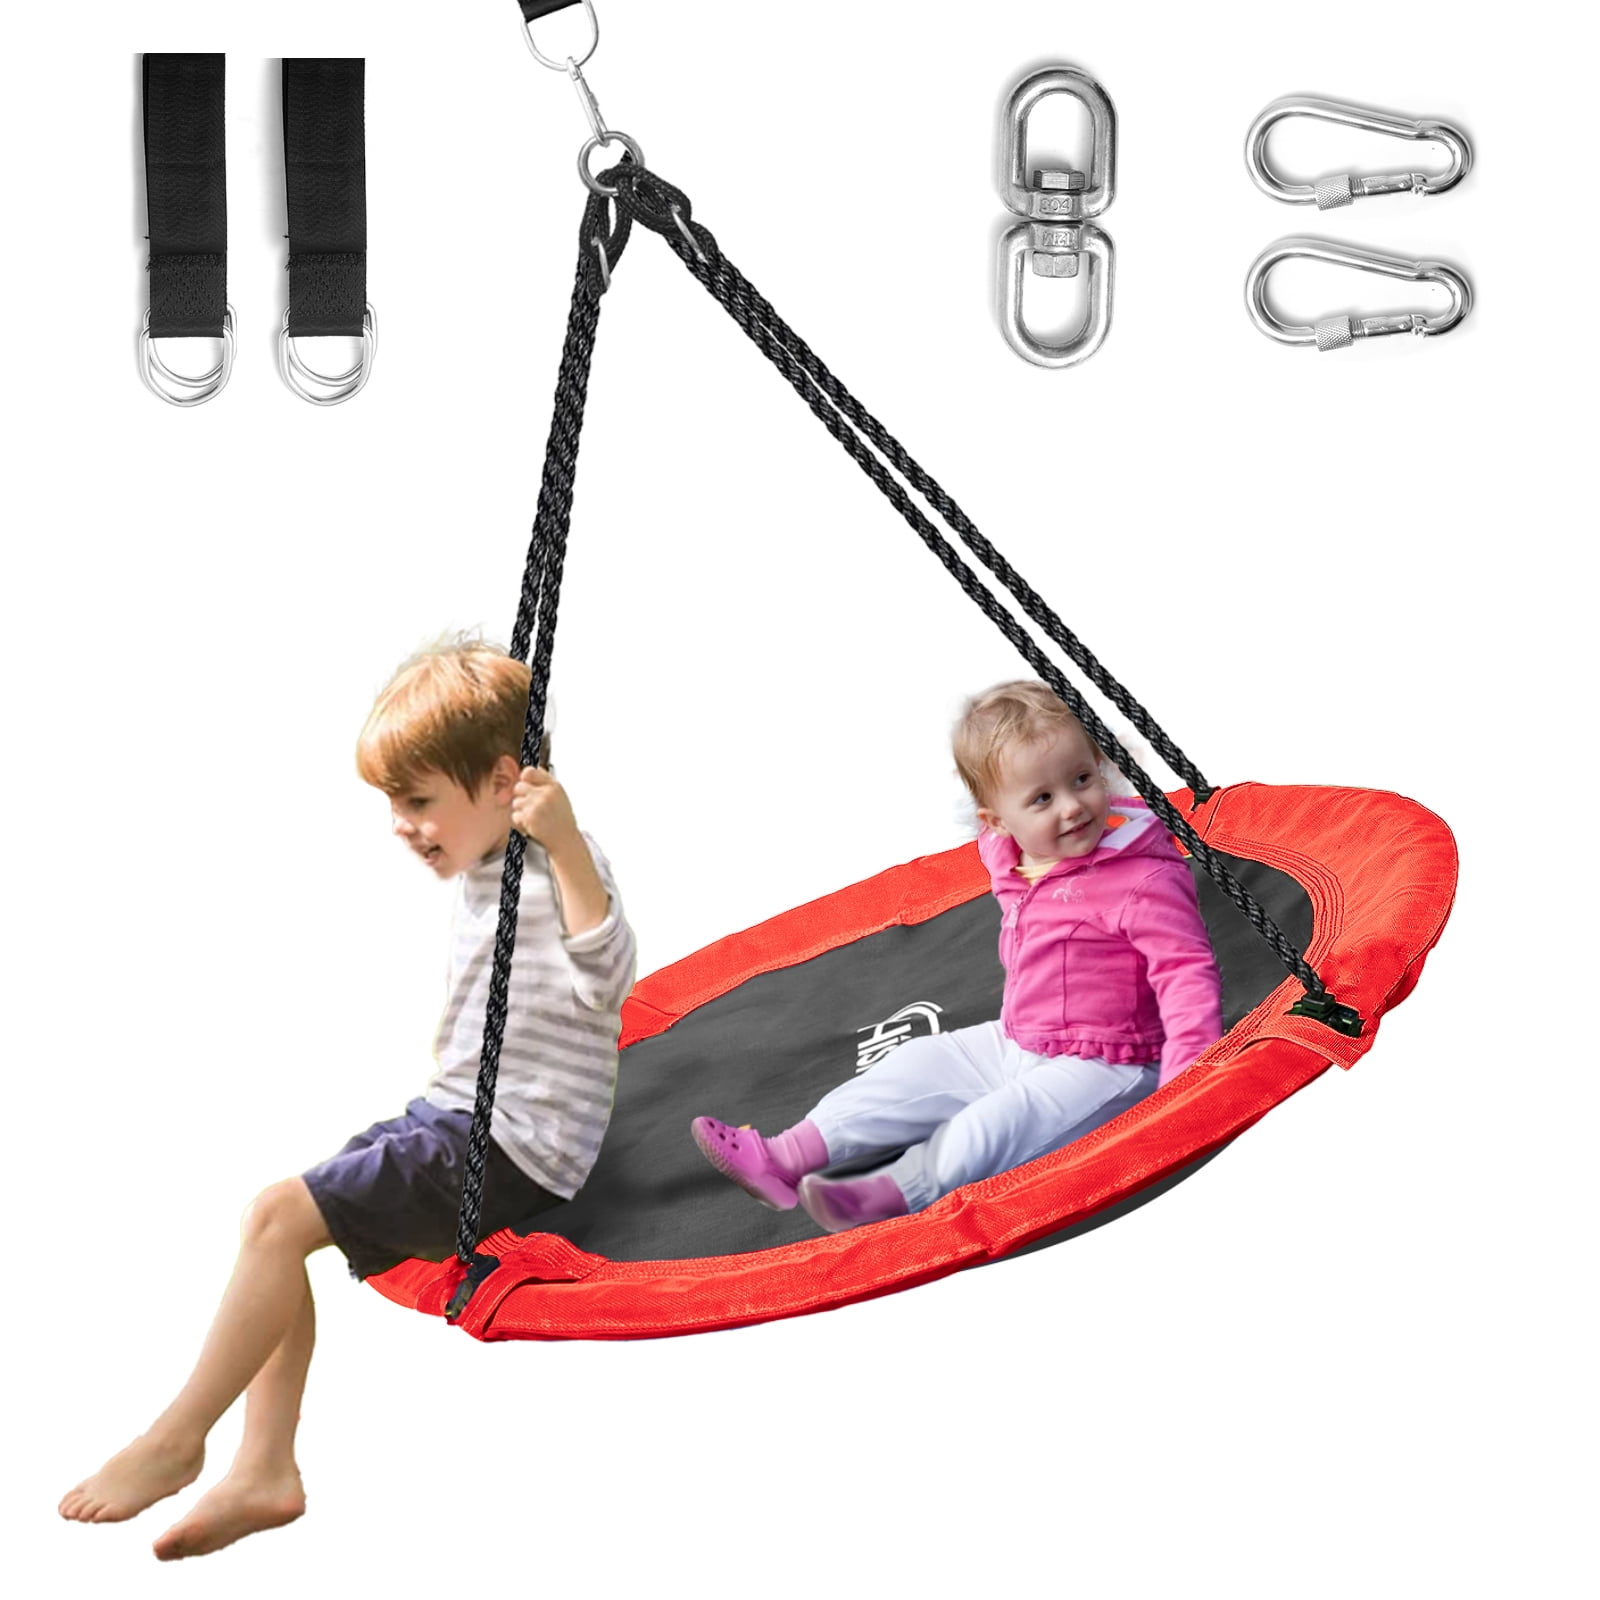 Waterproof & UV Resistant SUPER DEAL 40 Kids Web Tree Swing Saucer Swing Adjustable Nylon Ropes Perfect for Playground Backyard Outdoor Hanging Play 